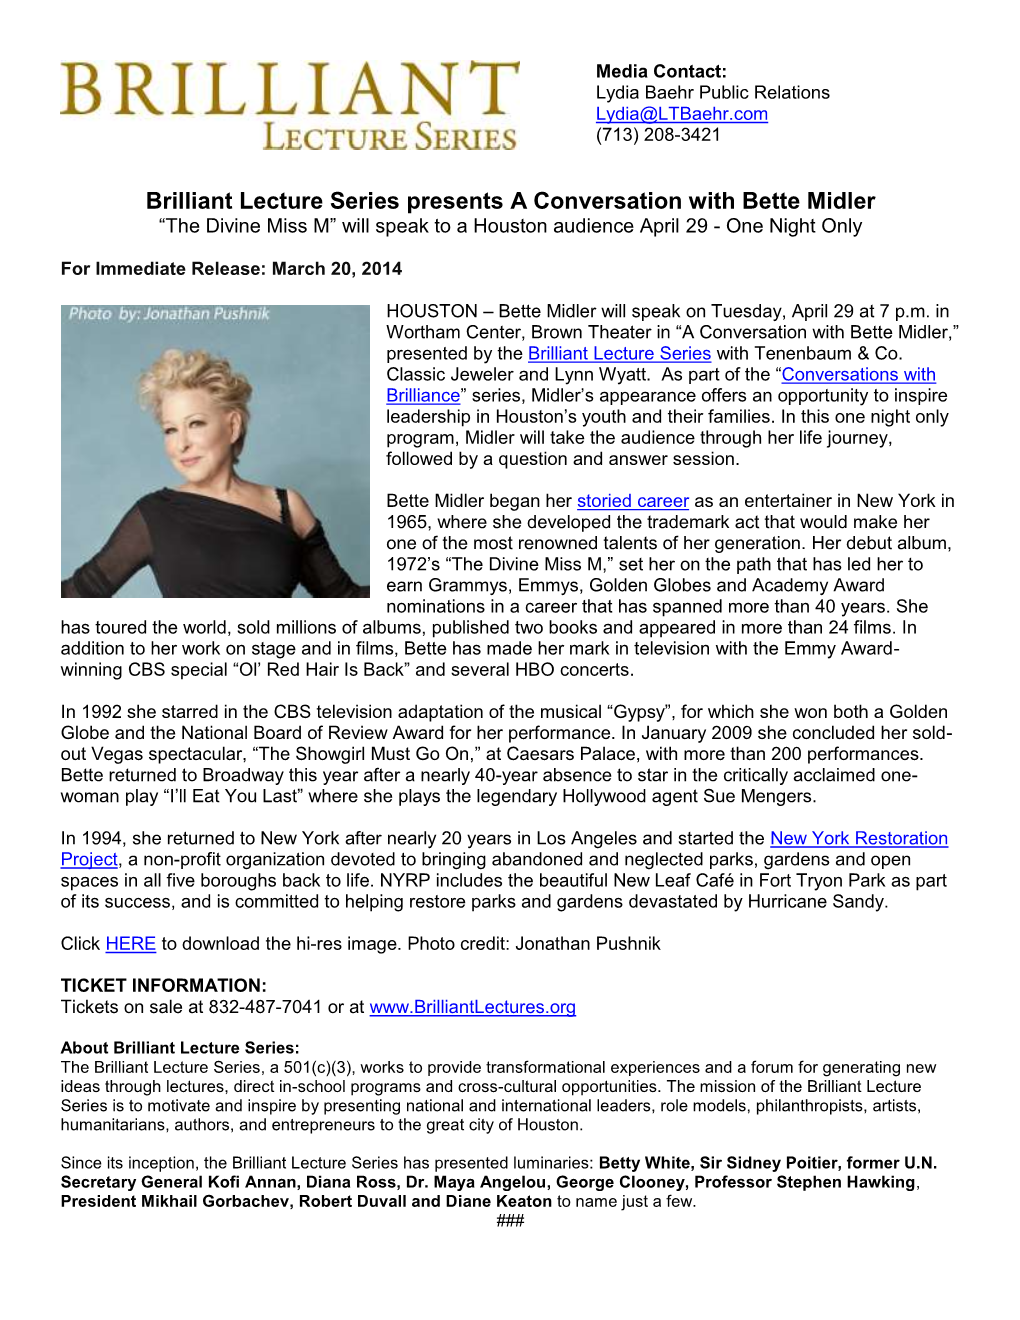 Brilliant Lecture Series Presents a Conversation with Bette Midler “The Divine Miss M” Will Speak to a Houston Audience April 29 - One Night Only